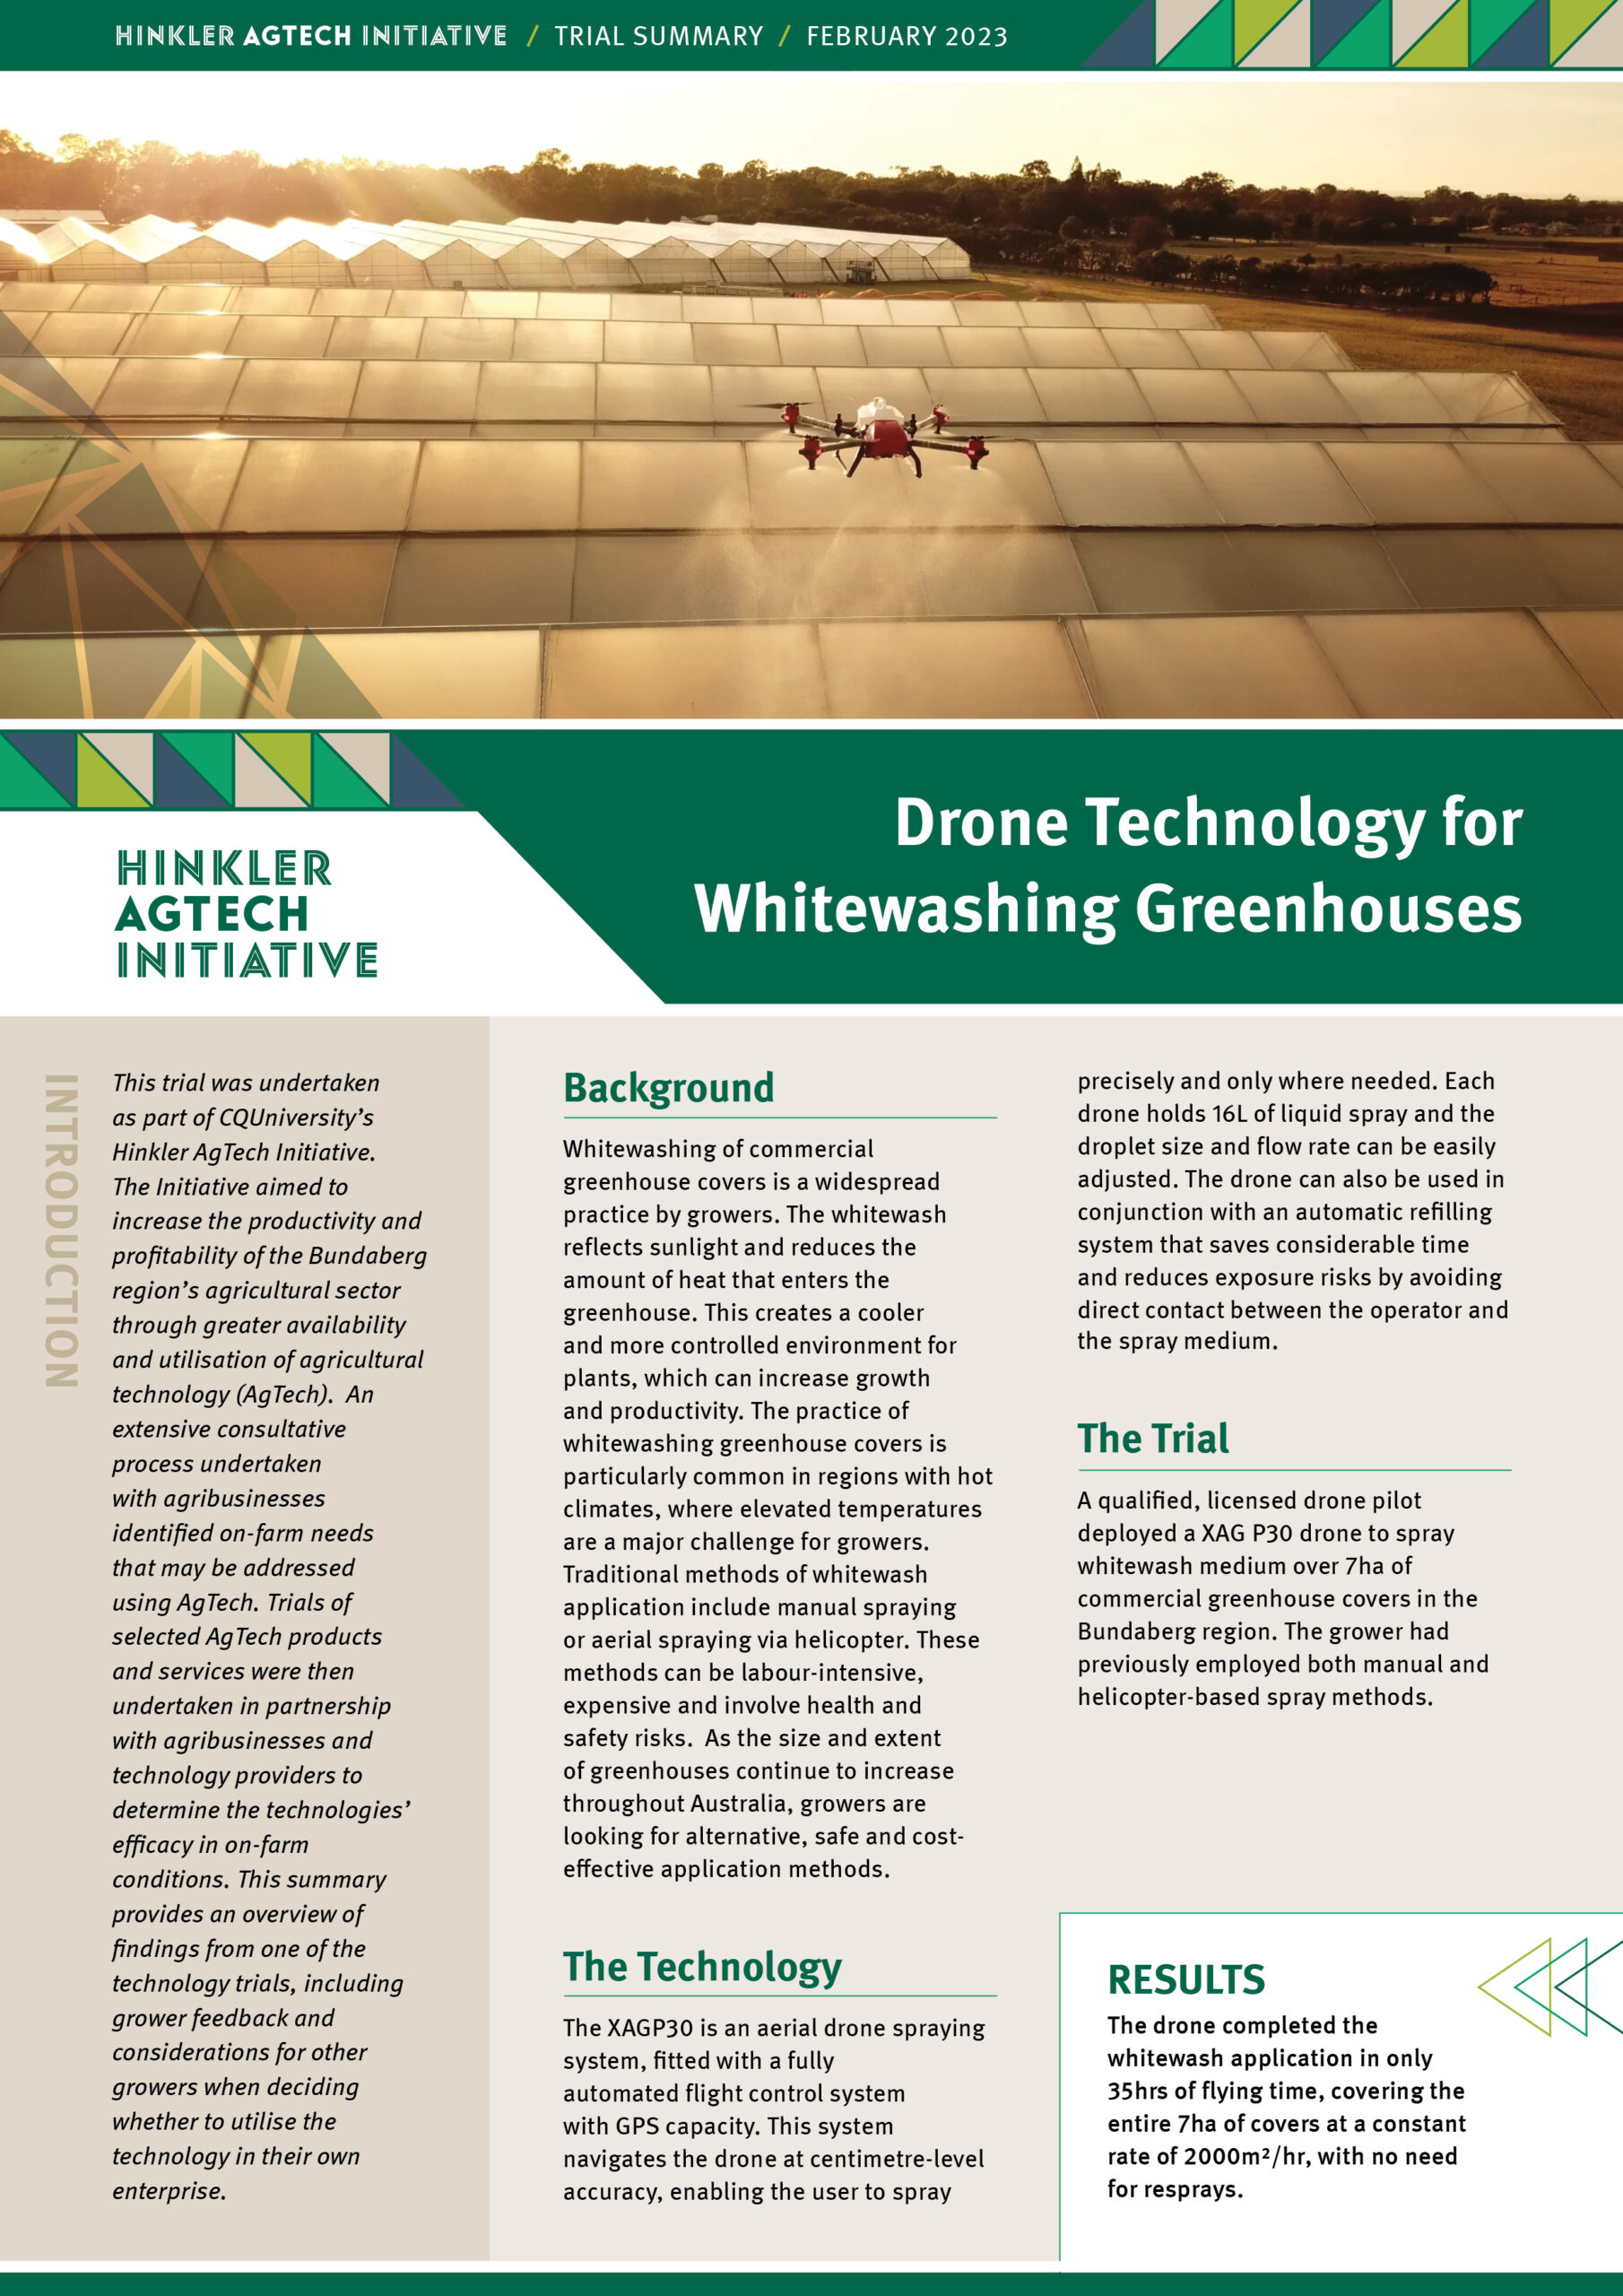 Drone Technology for Whitewashing Greenhouses